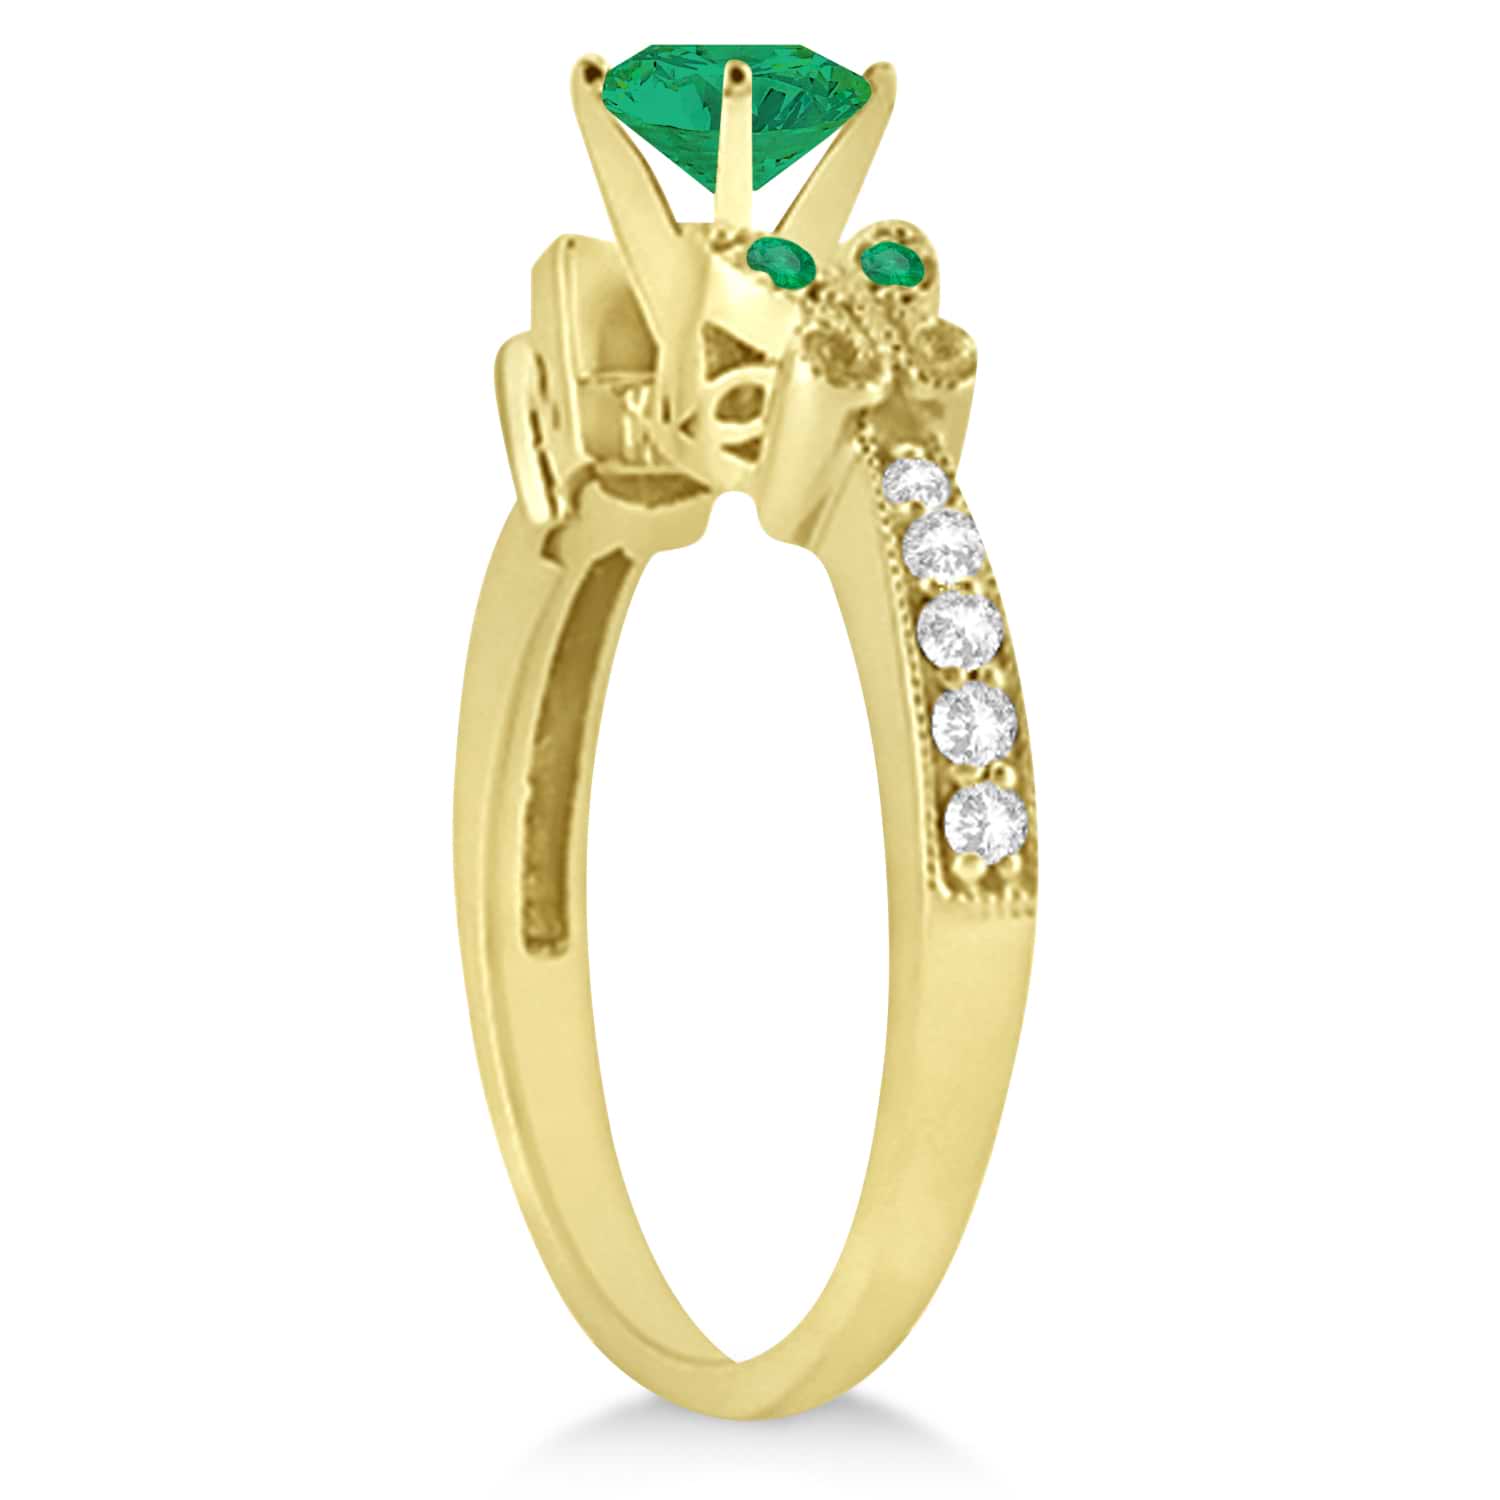 Butterfly Genuine Emerald & Diamond Engagement Ring 14K Yellow Gold 1.11ct